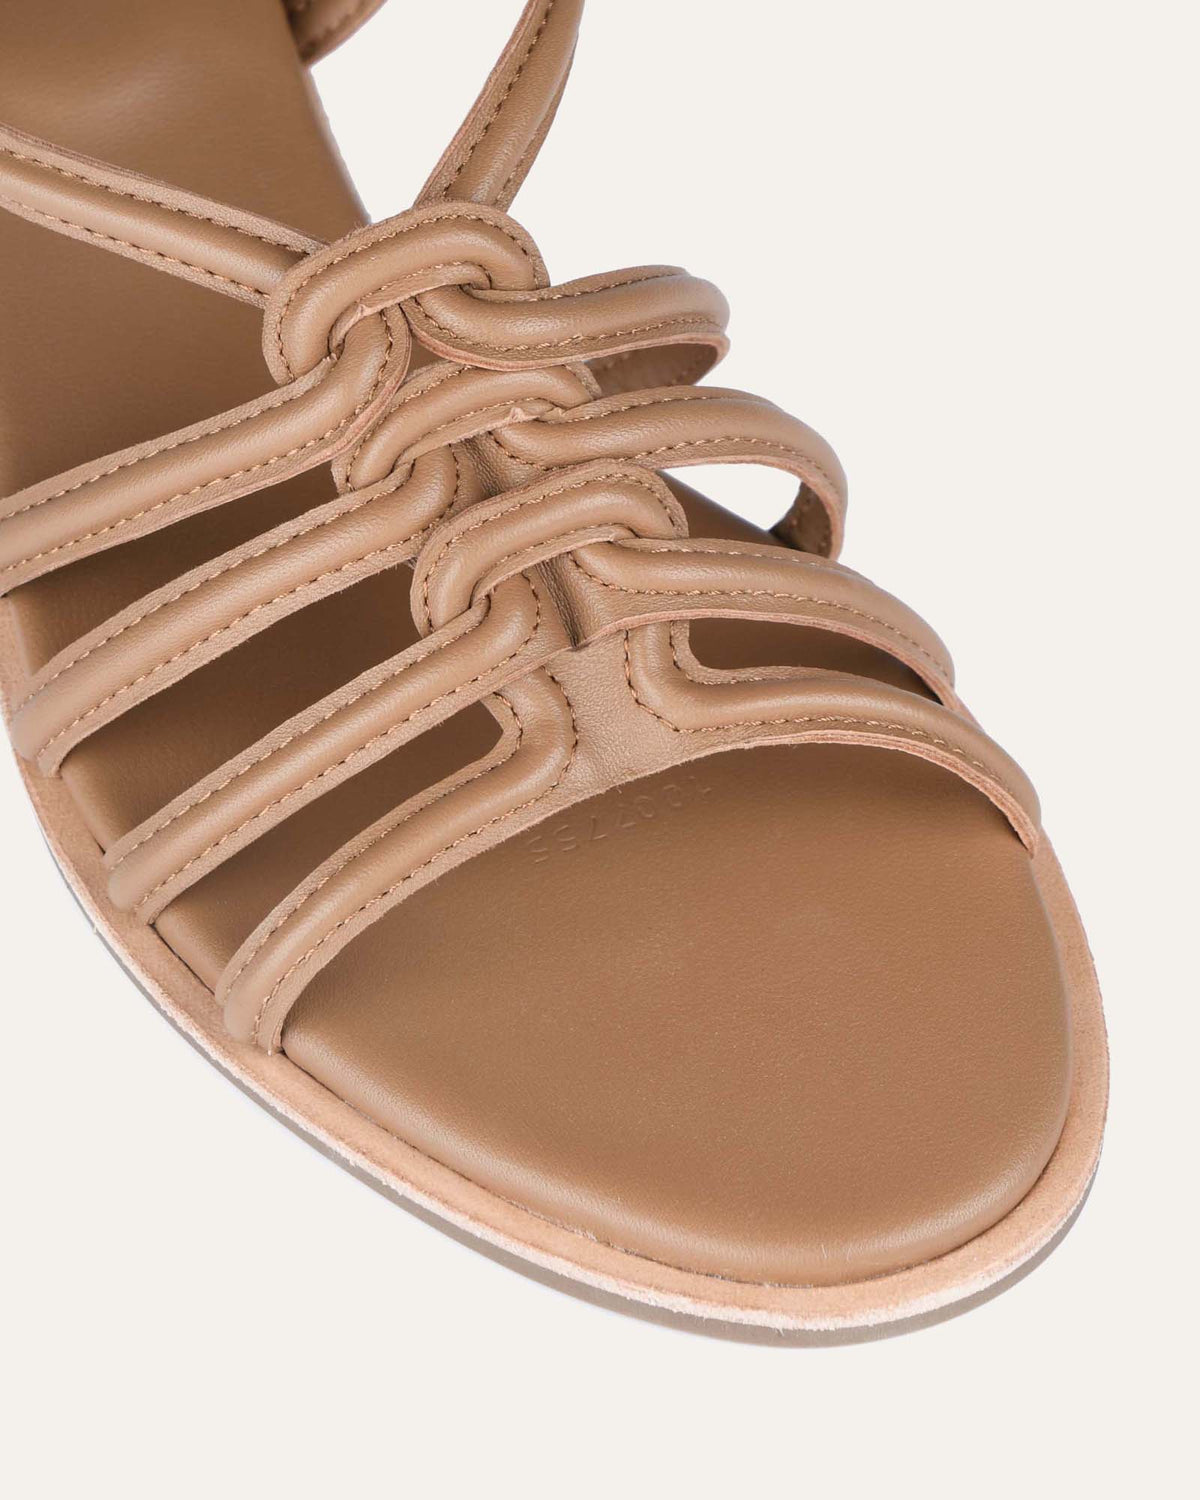 QUEEN FLAT SANDALS TAN LEATHER